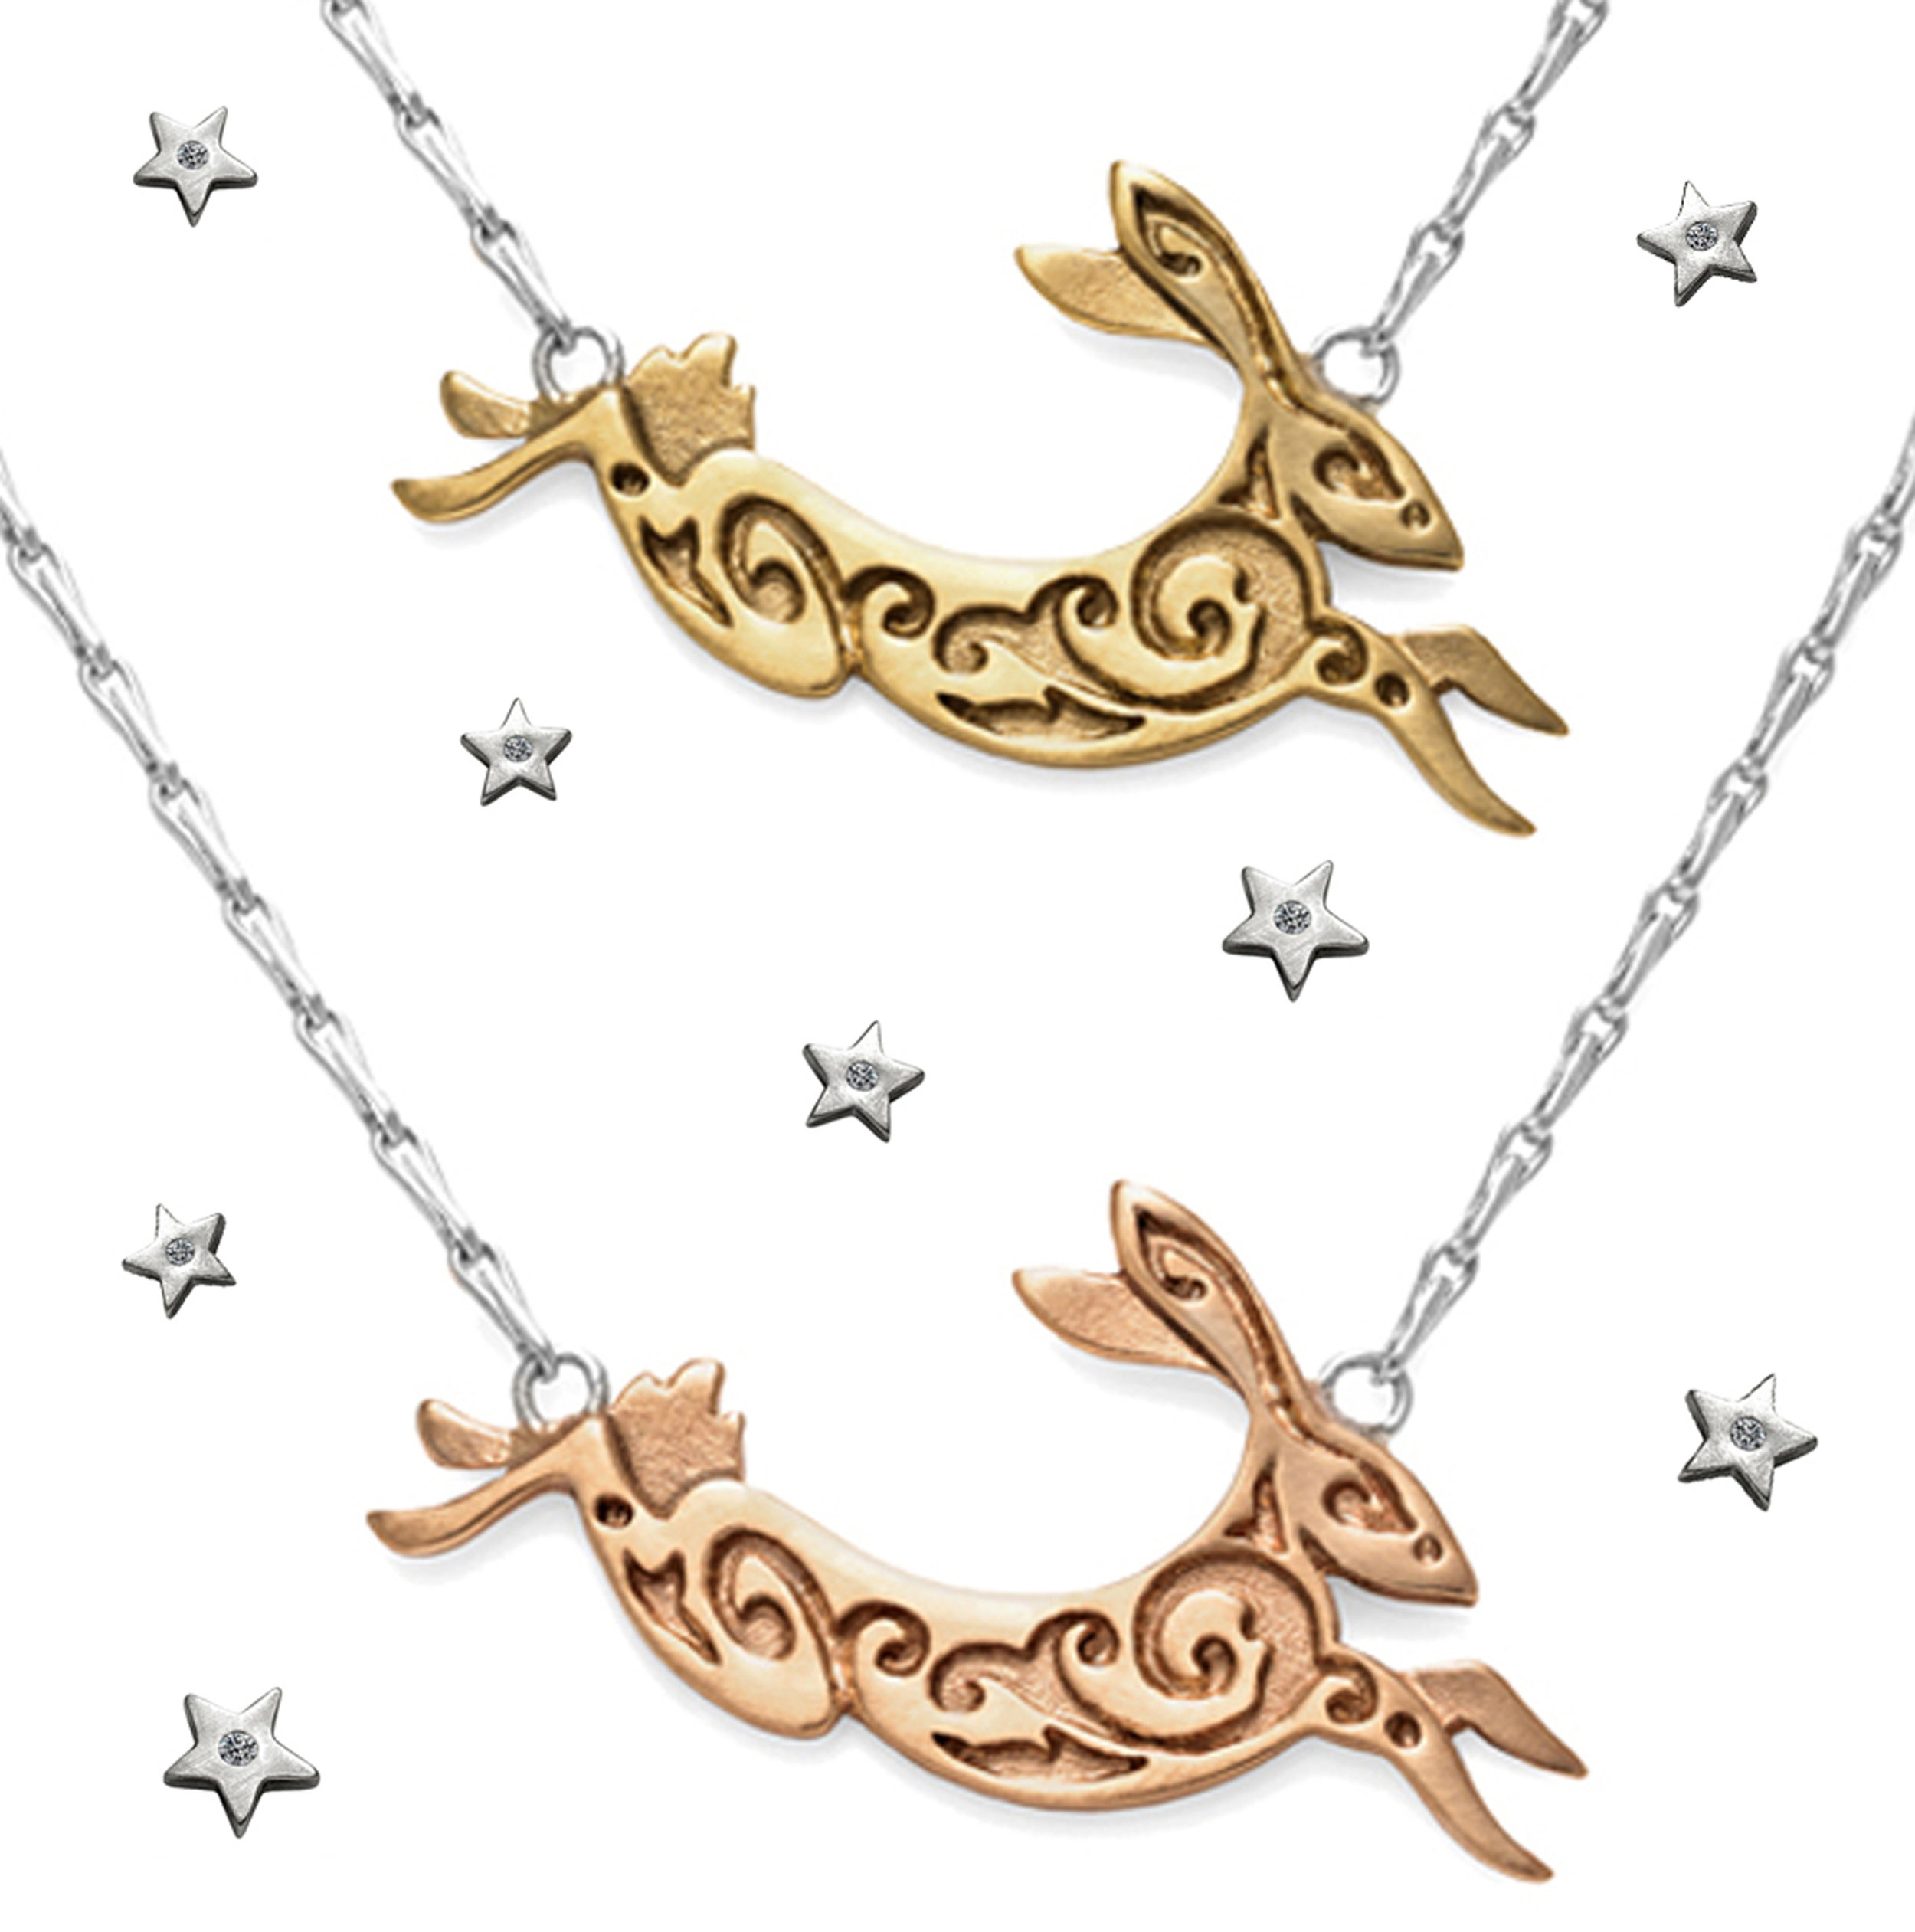 4. Small Hare Necklaces in recycled 9ct yellow and rose gold 300dpi